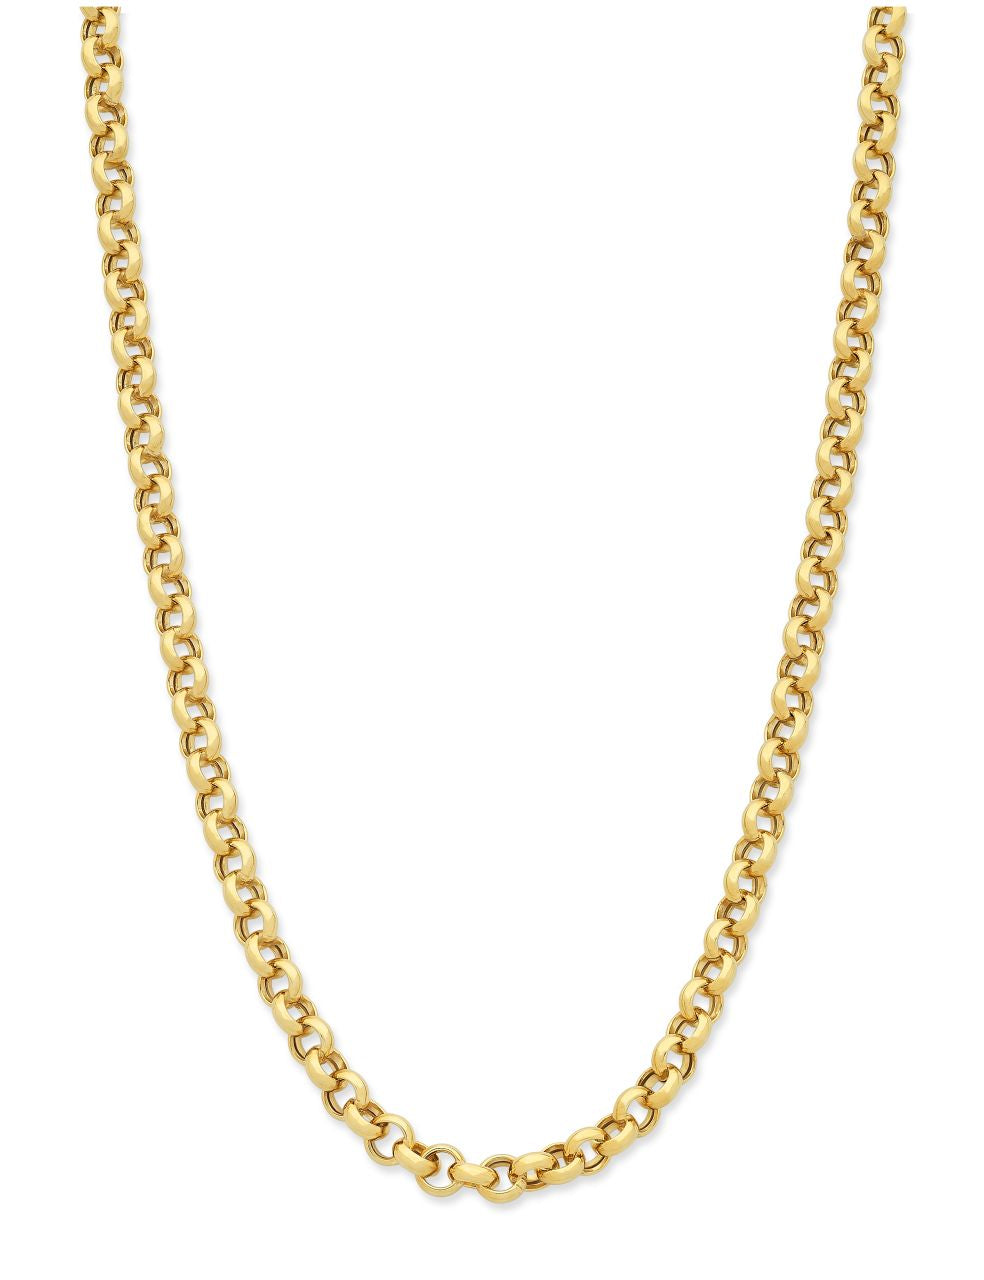 9ct Yellow Gold Silver Filled Chain